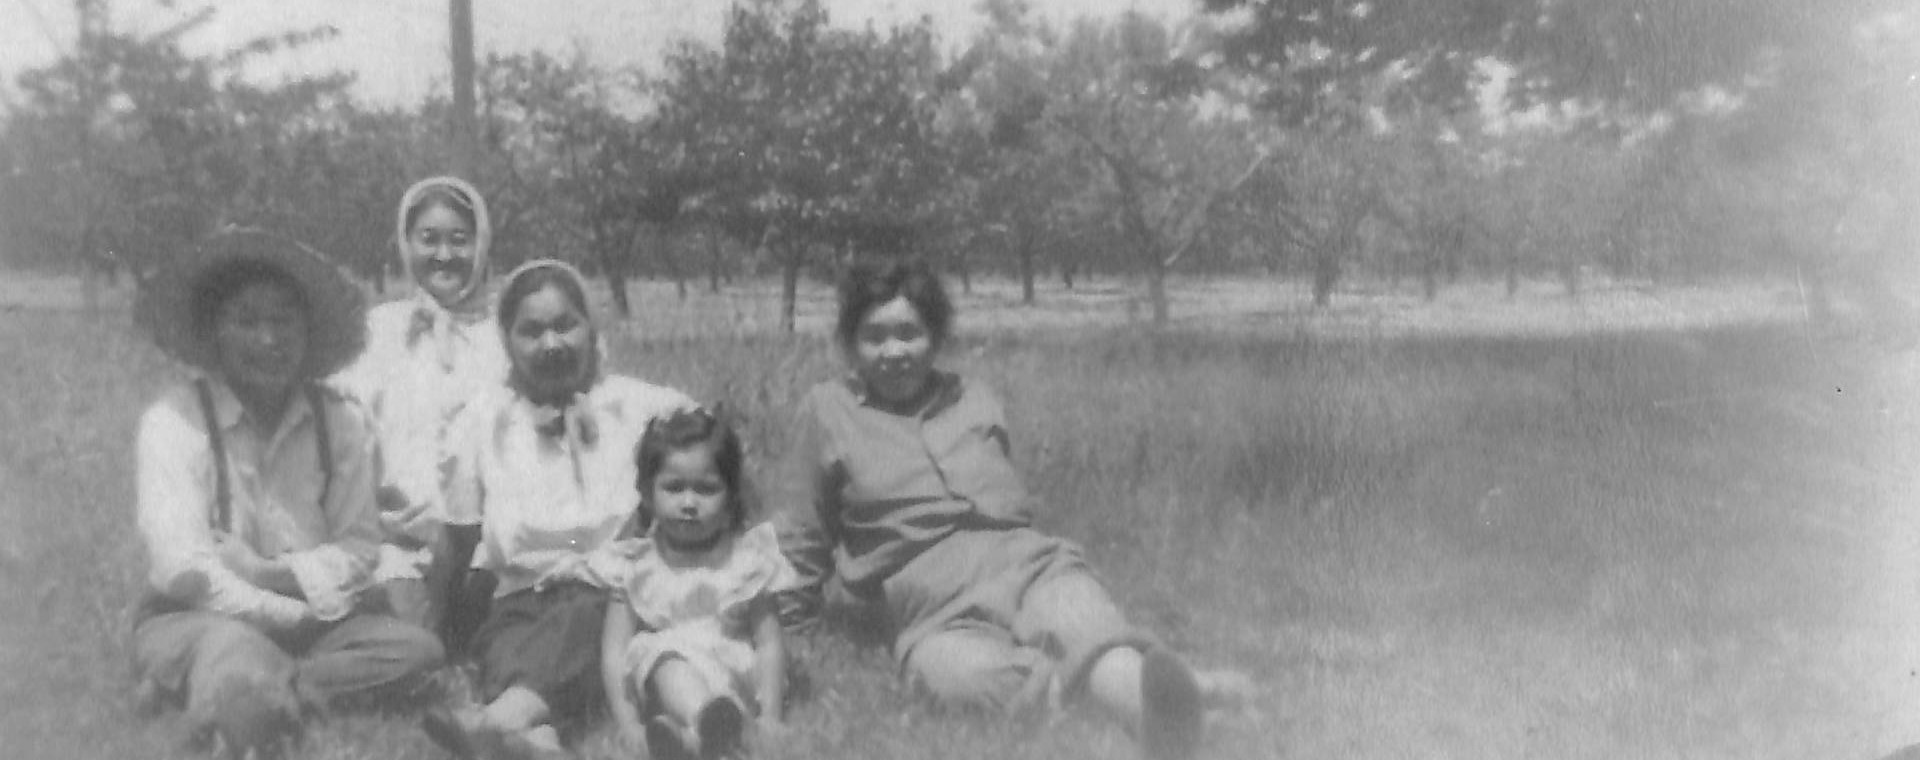 Four women and a young girl sitting in the grass in an orchard